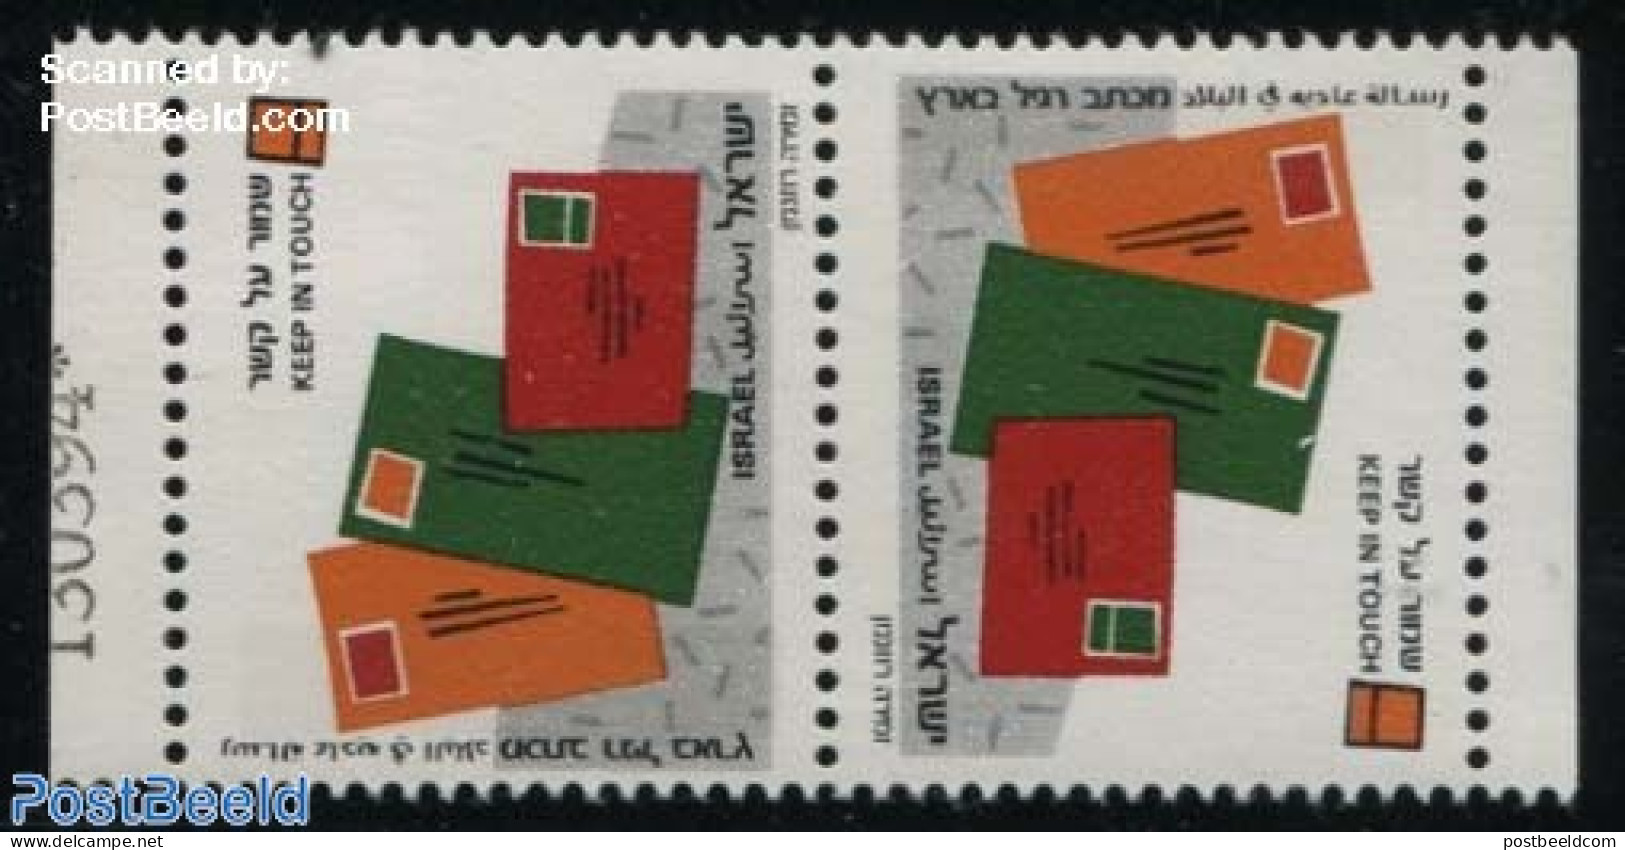 Israel 1991 Greeting Stamps 1v, Tete-beche Pair, Mint NH, Various - Post - Greetings & Wishing Stamps - Neufs (avec Tabs)